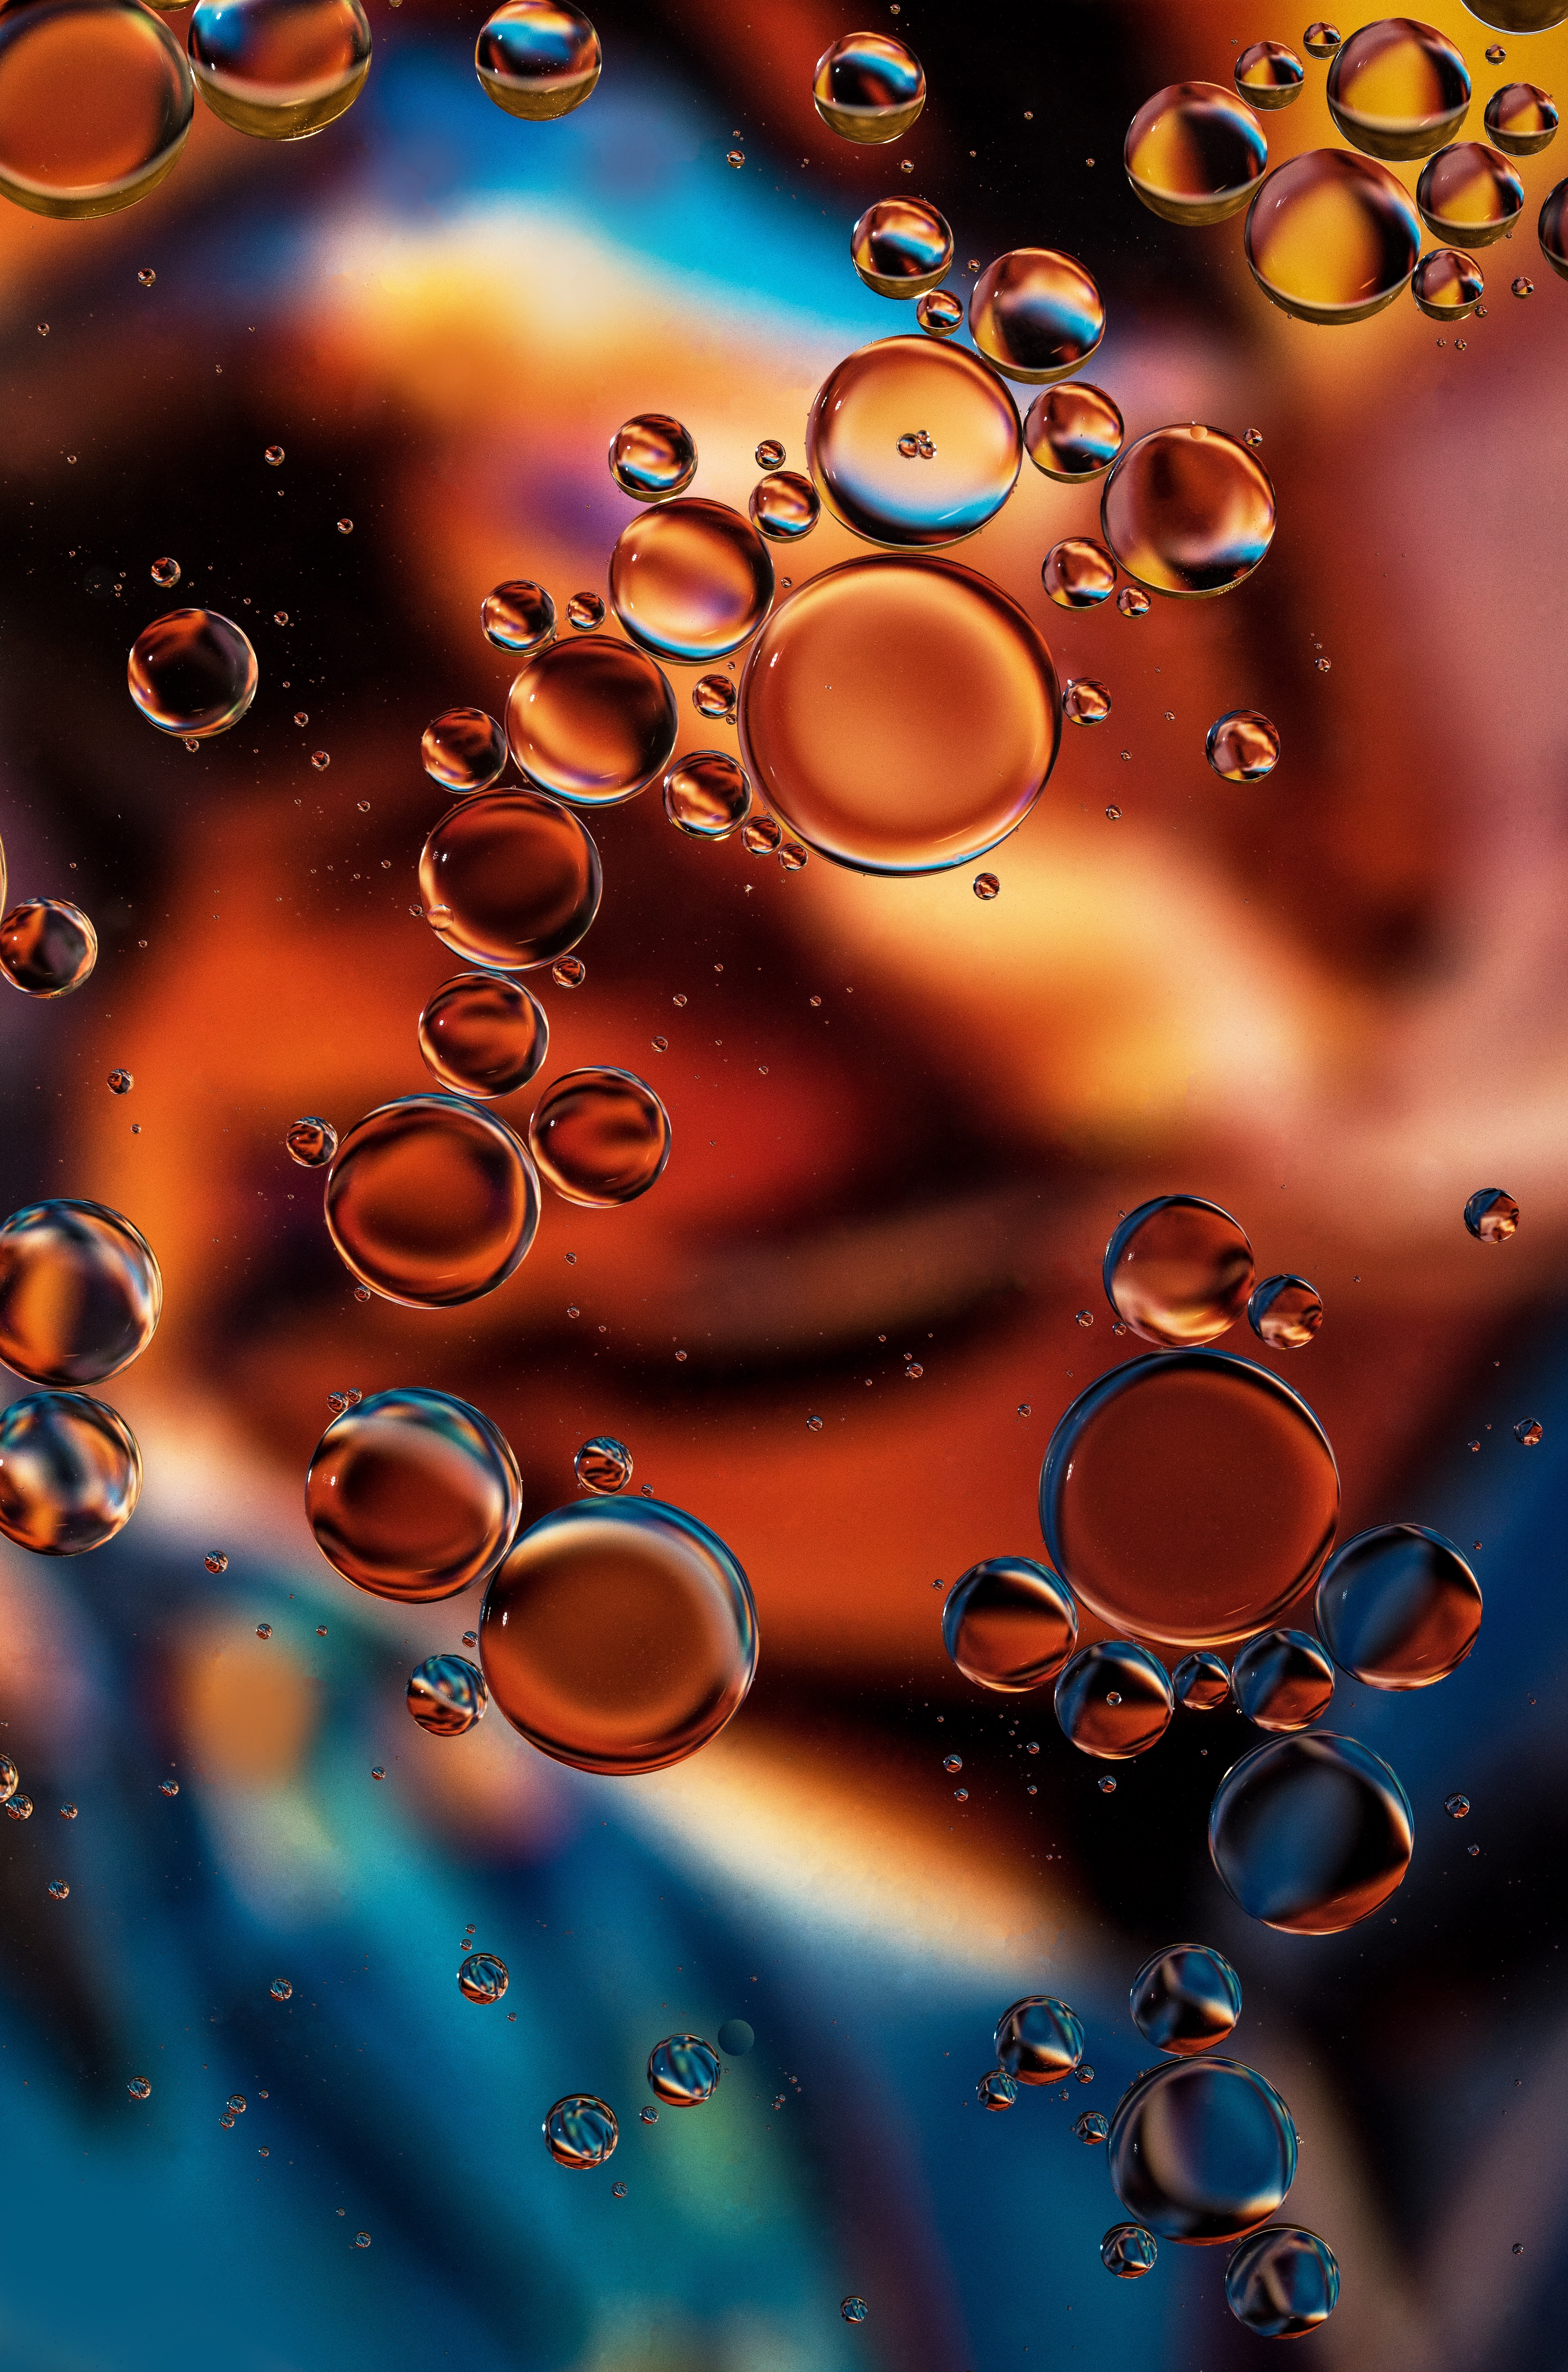 138144 download wallpaper bubbles, transparent, macro, liquid screensavers and pictures for free